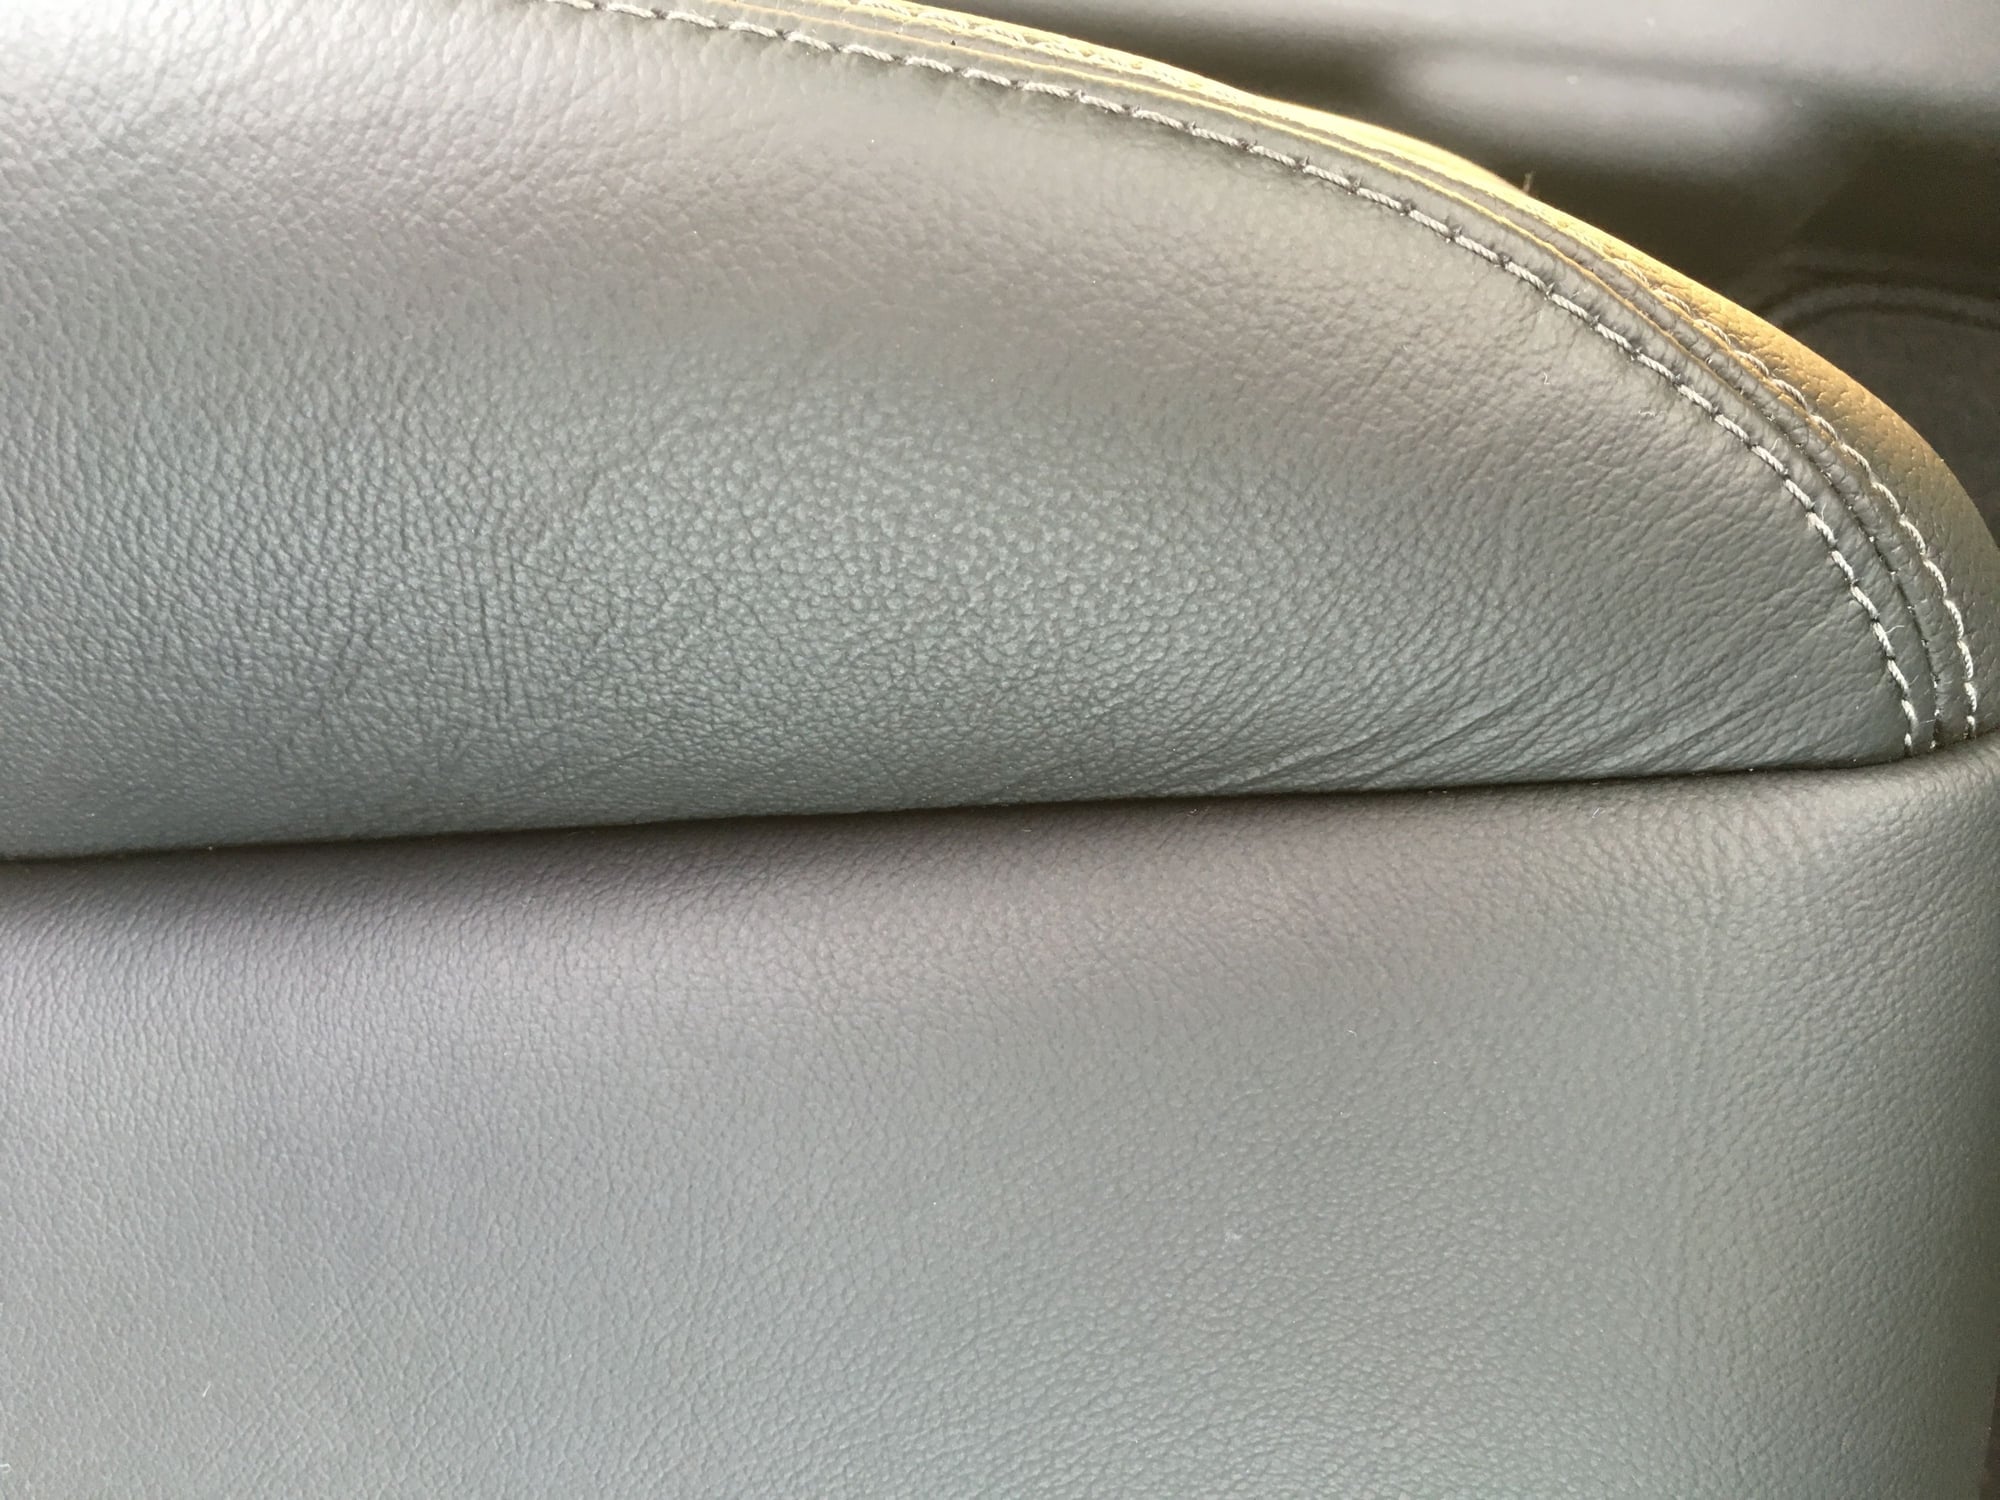 Leather Seat Badly Wrinkled - Unofficial Honda FIT Forums